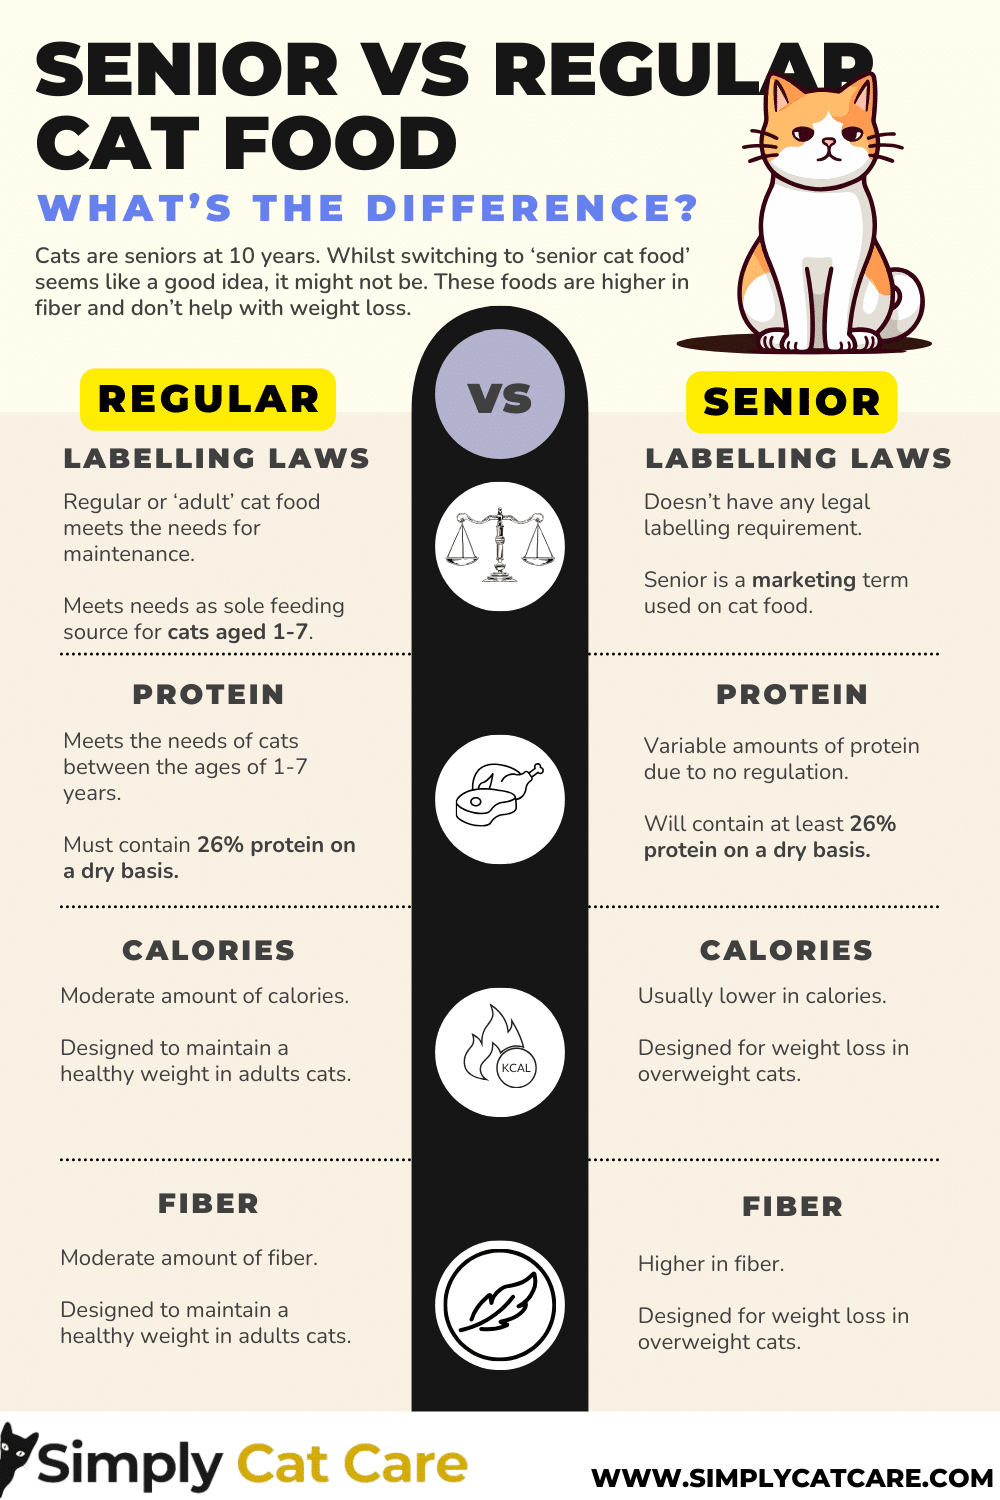 An infographic on the difference between senior cat food vs regular cat food.